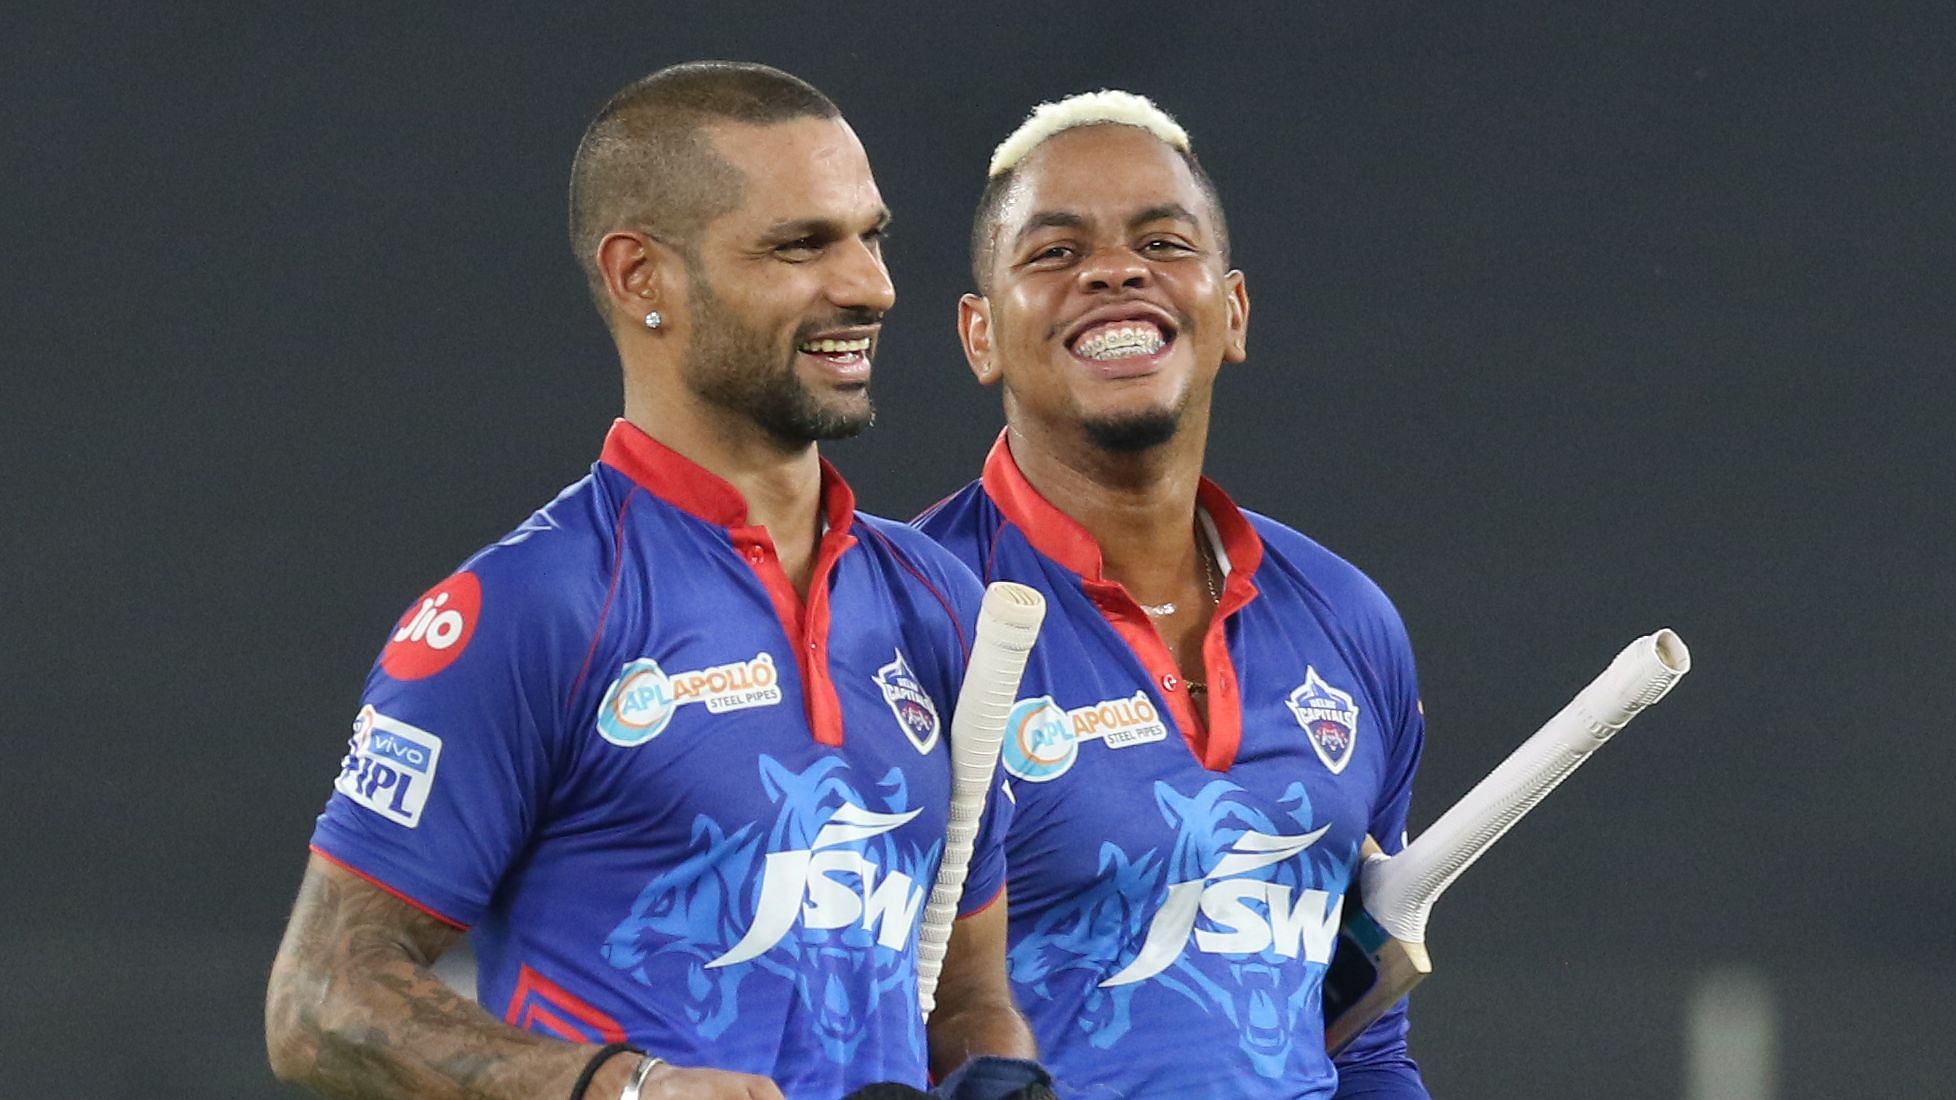 Shikhar Dhawan carried his bat to remain unbeaten at 69 to help Delhi Capitals beat Punjab Kings by 7 wickets.